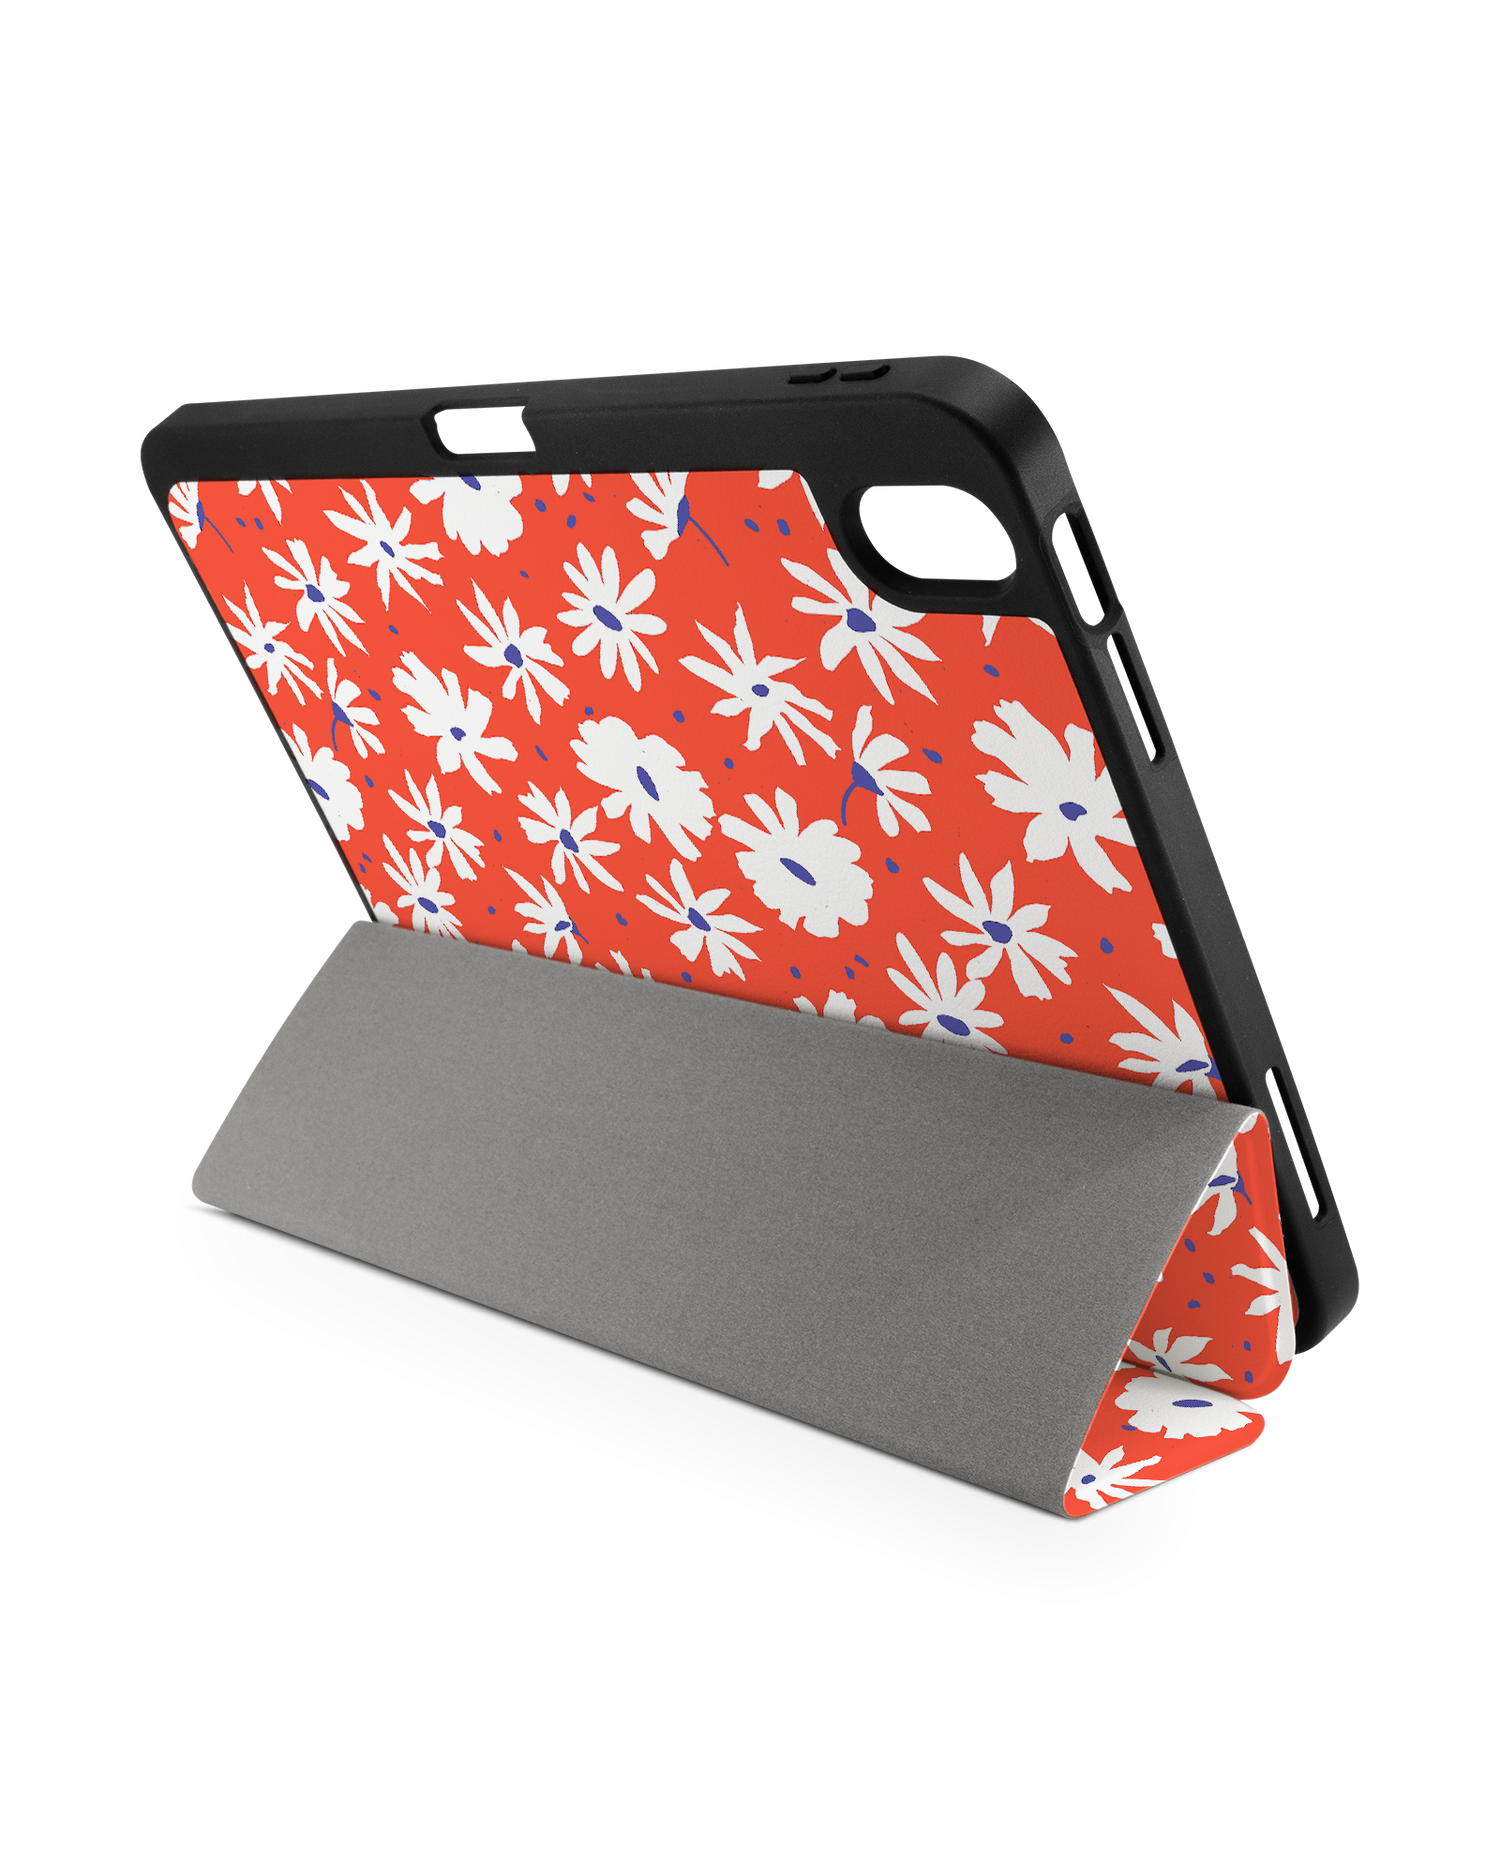 Retro Daisy iPad Case with Pencil Holder for Apple iPad (10th Generation): Set up in landscape format (back view)